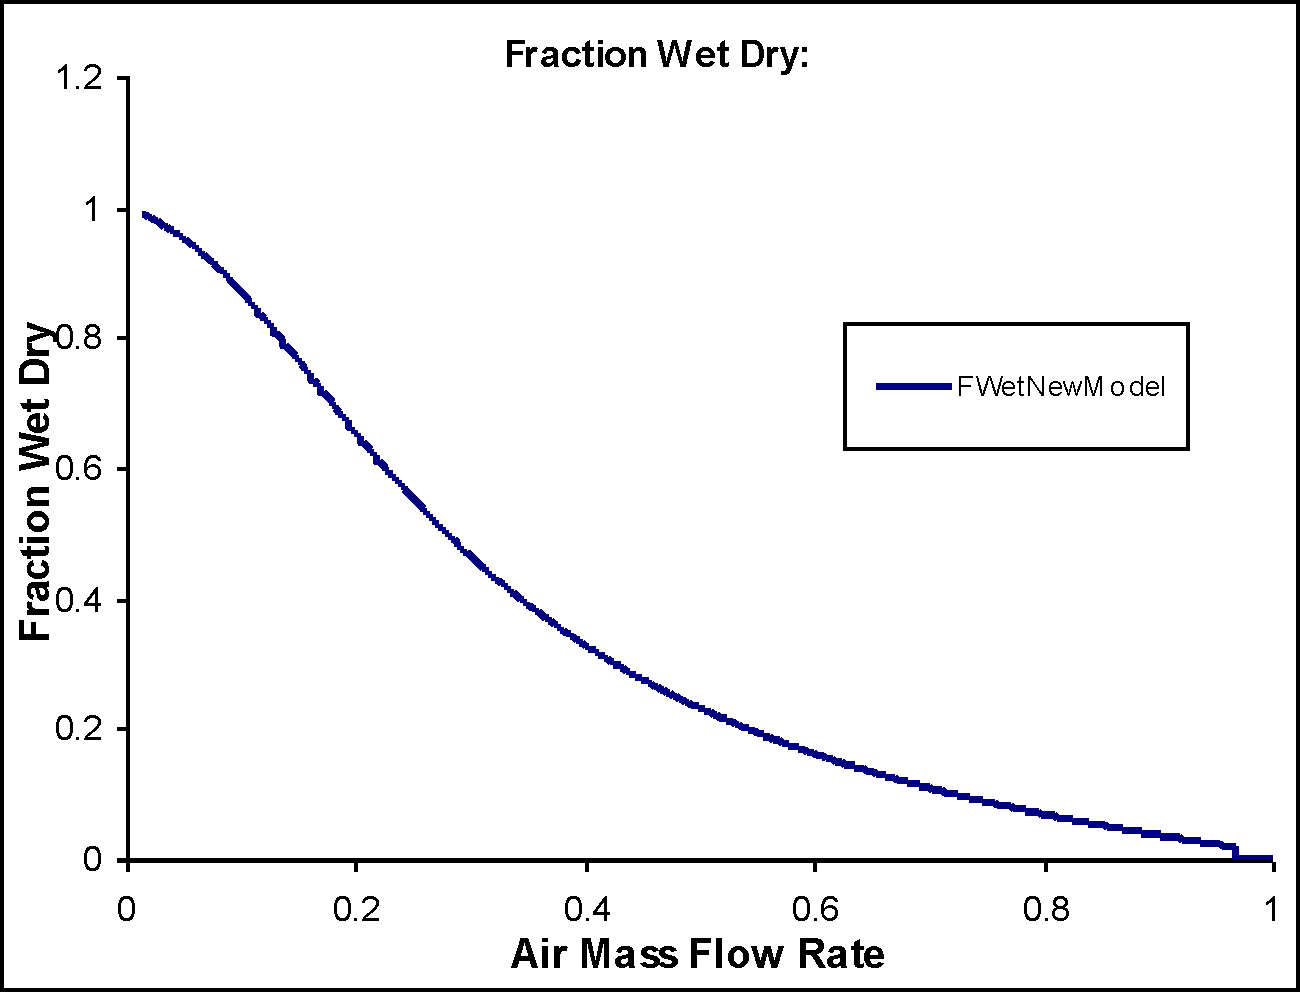 Surface Area Fraction Wet Vs Air Mass Flow Rate